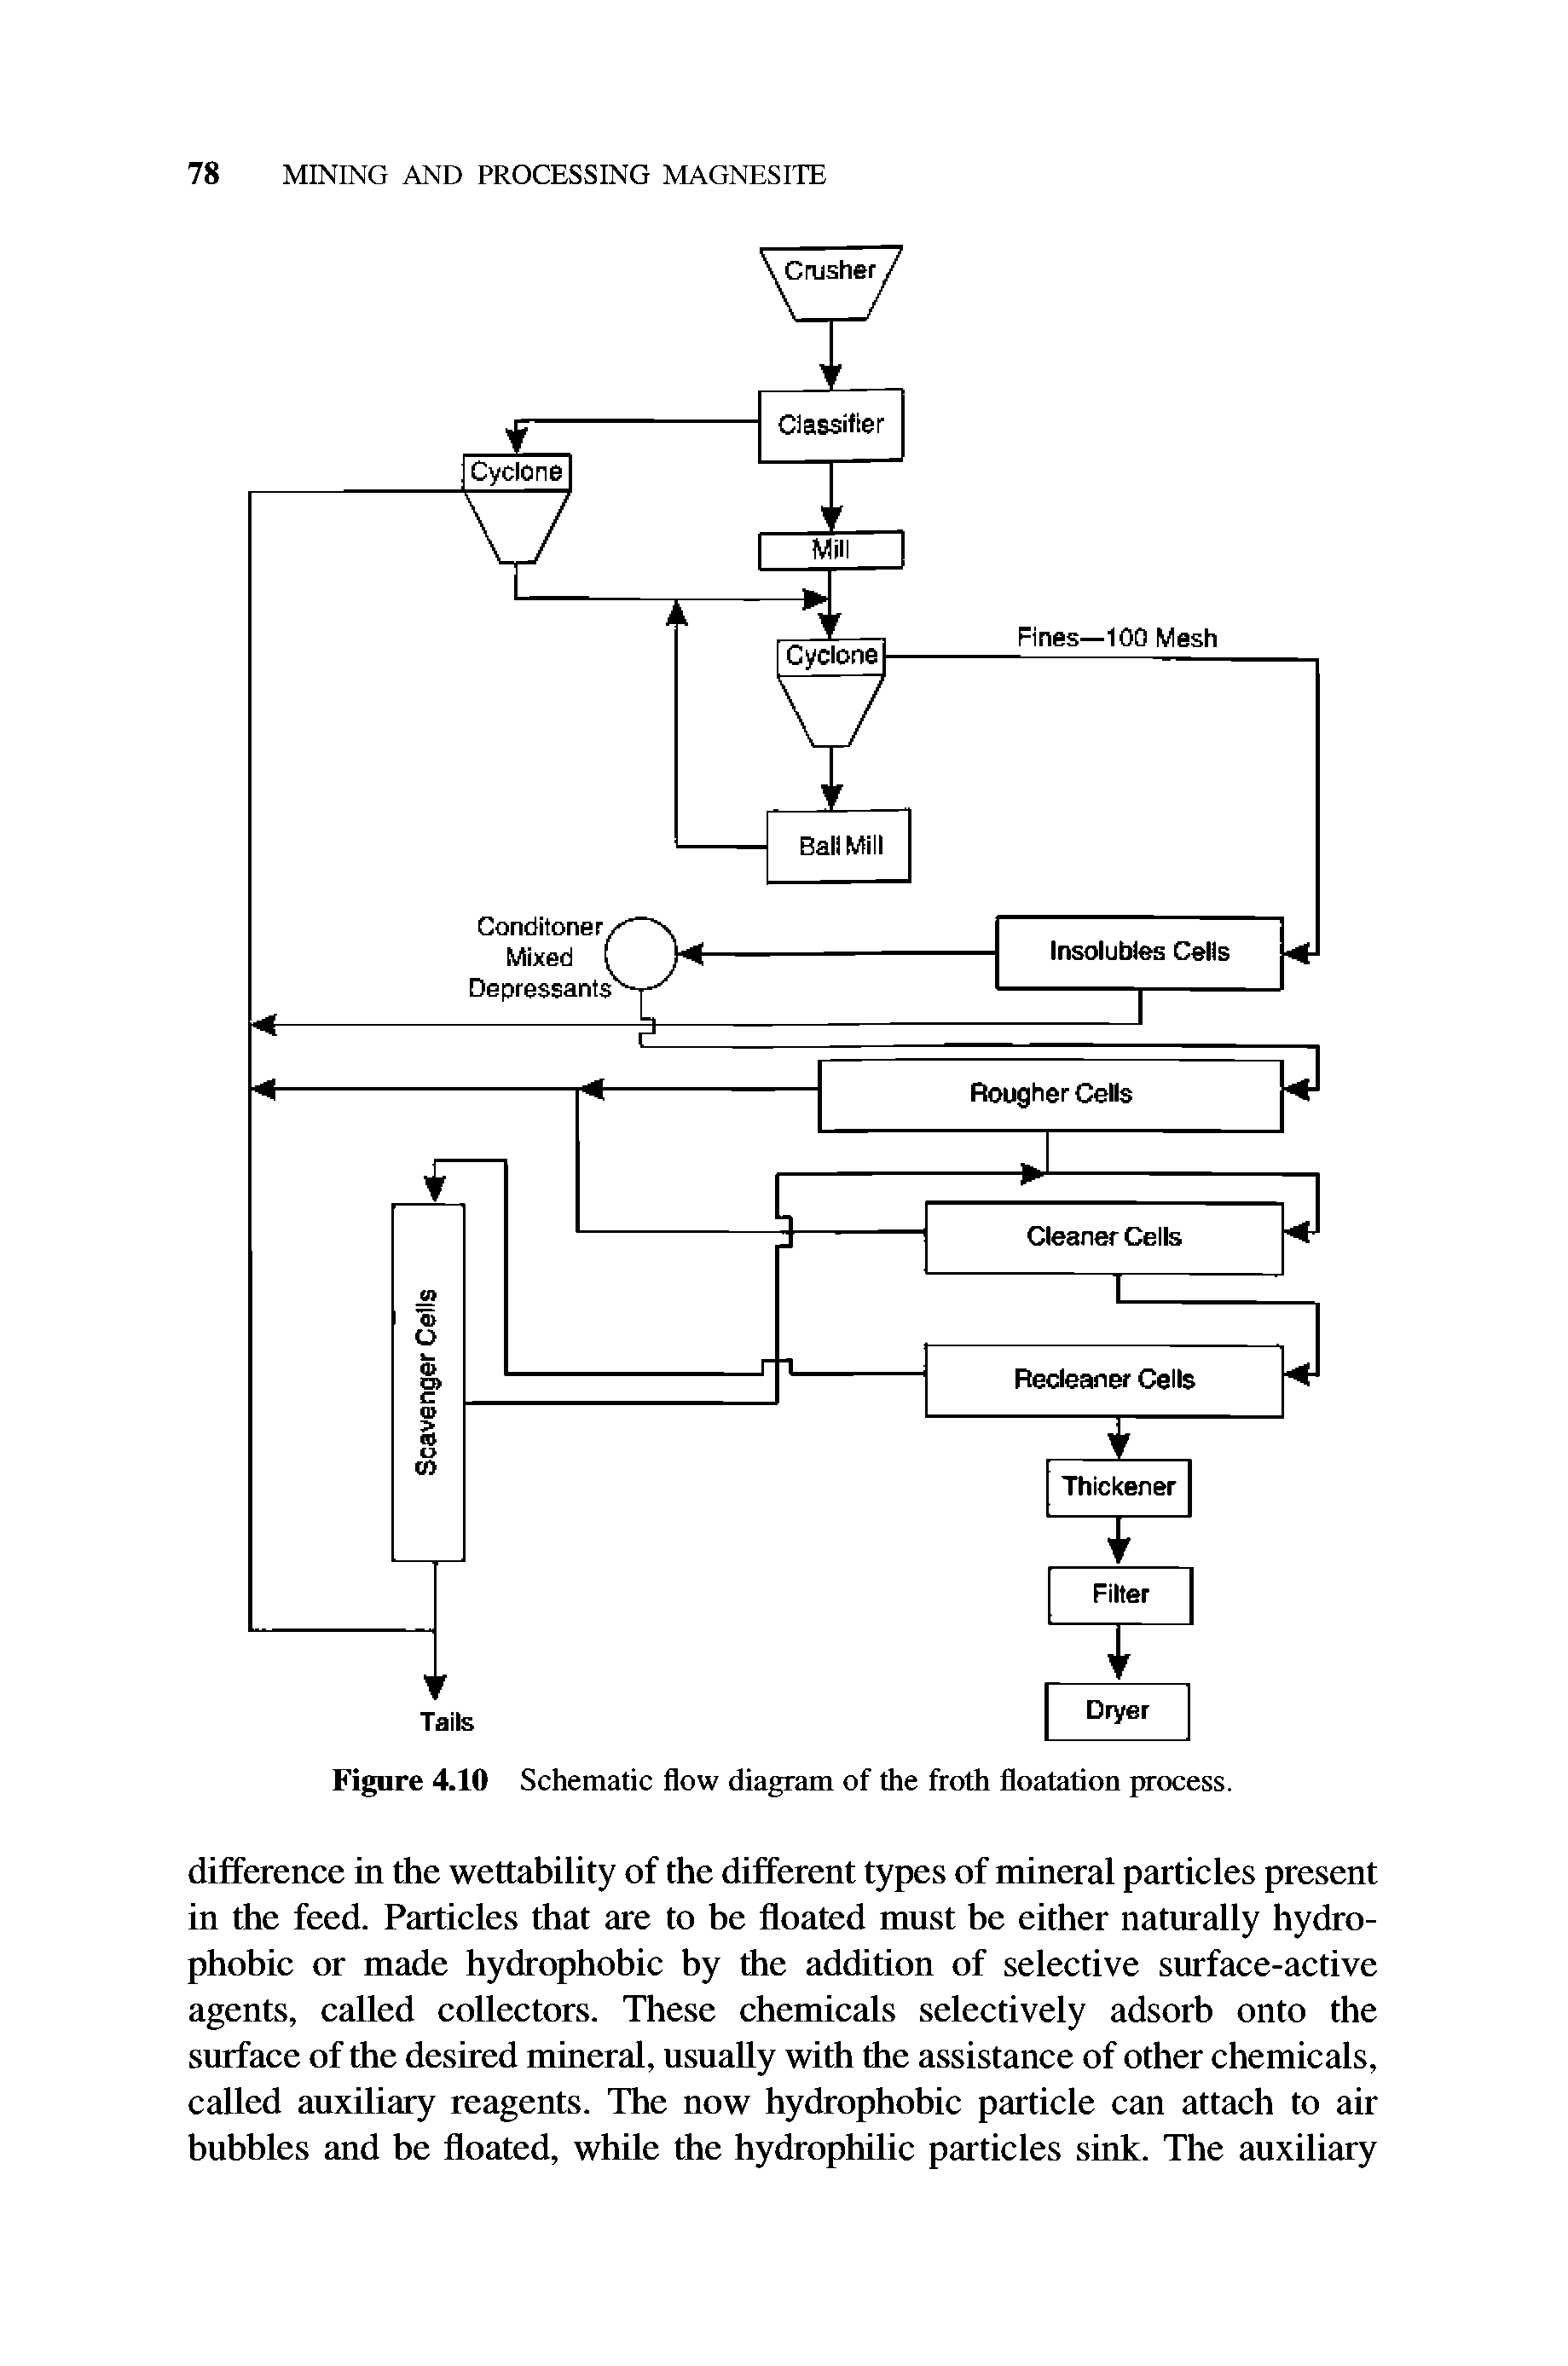 Figure 4.10 Schematic flow diagram of the froth floatation process.